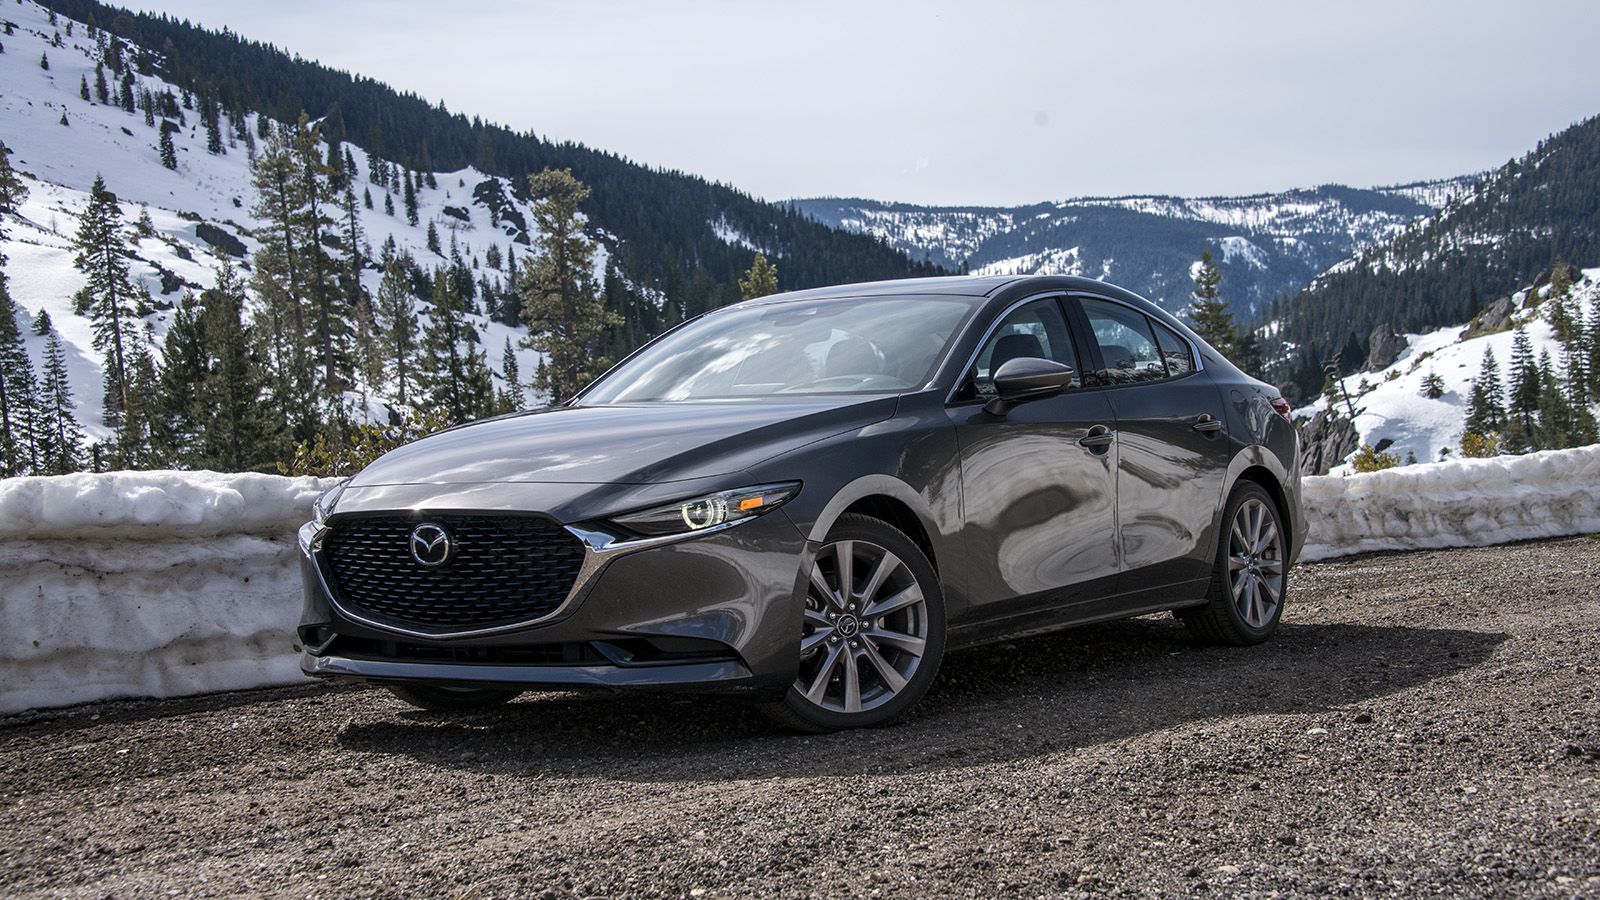 The Mazda 3 Hatch Is Getting a Turbo! Maybe